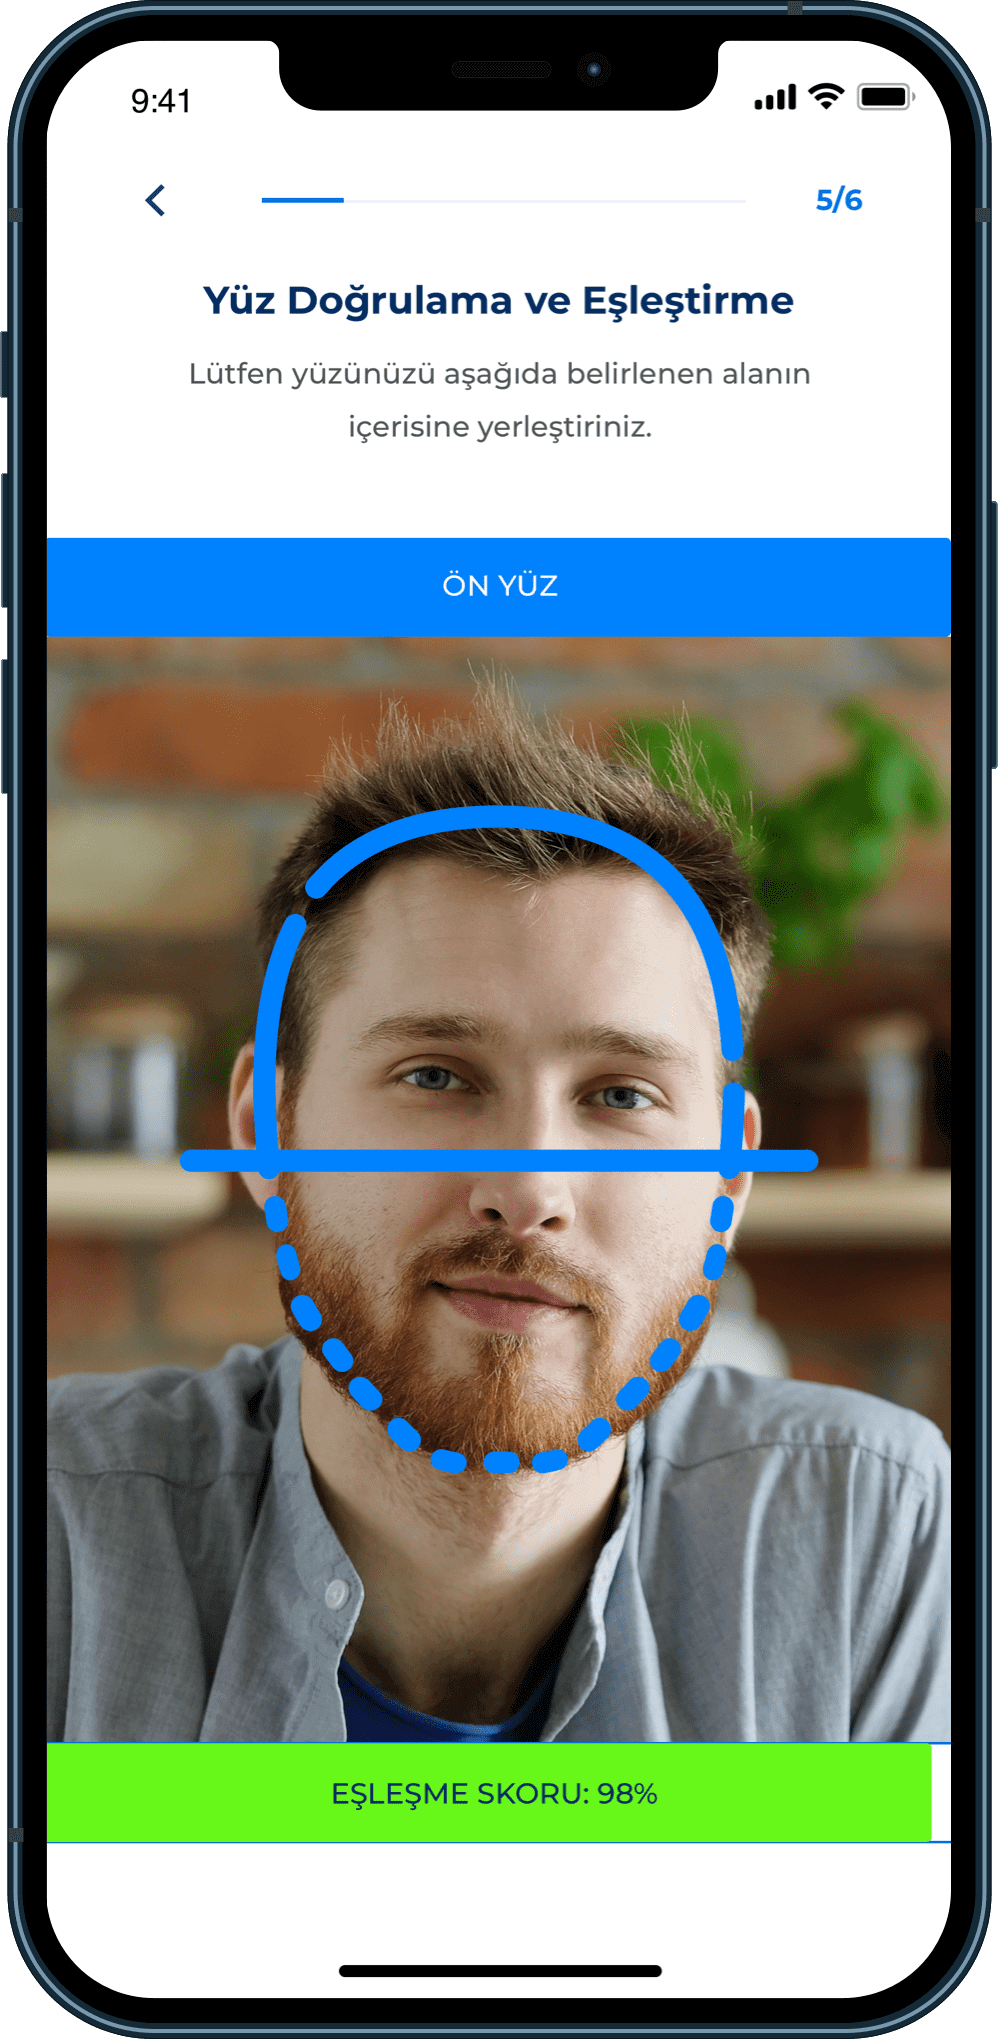 Face authentication & matching